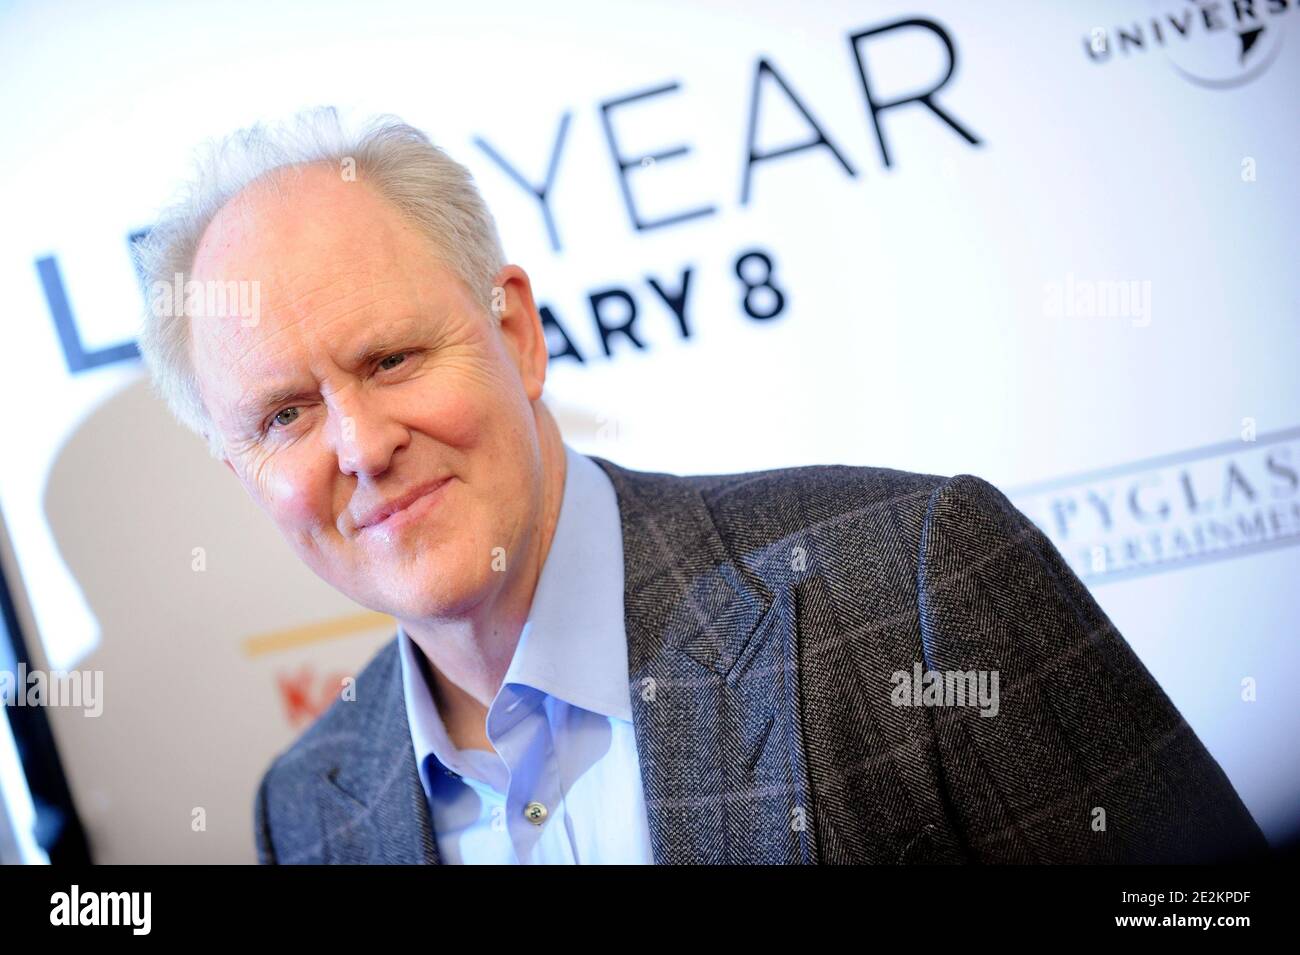 John Lithgow attends the premiere of 'Leap Year' at Directors Guild Theatre in New York City, NY, USA on January 6, 2010. Photo by Mehdi Taamallah/ABACAPRESS.COM (Pictured: John Lithgow) Stock Photo